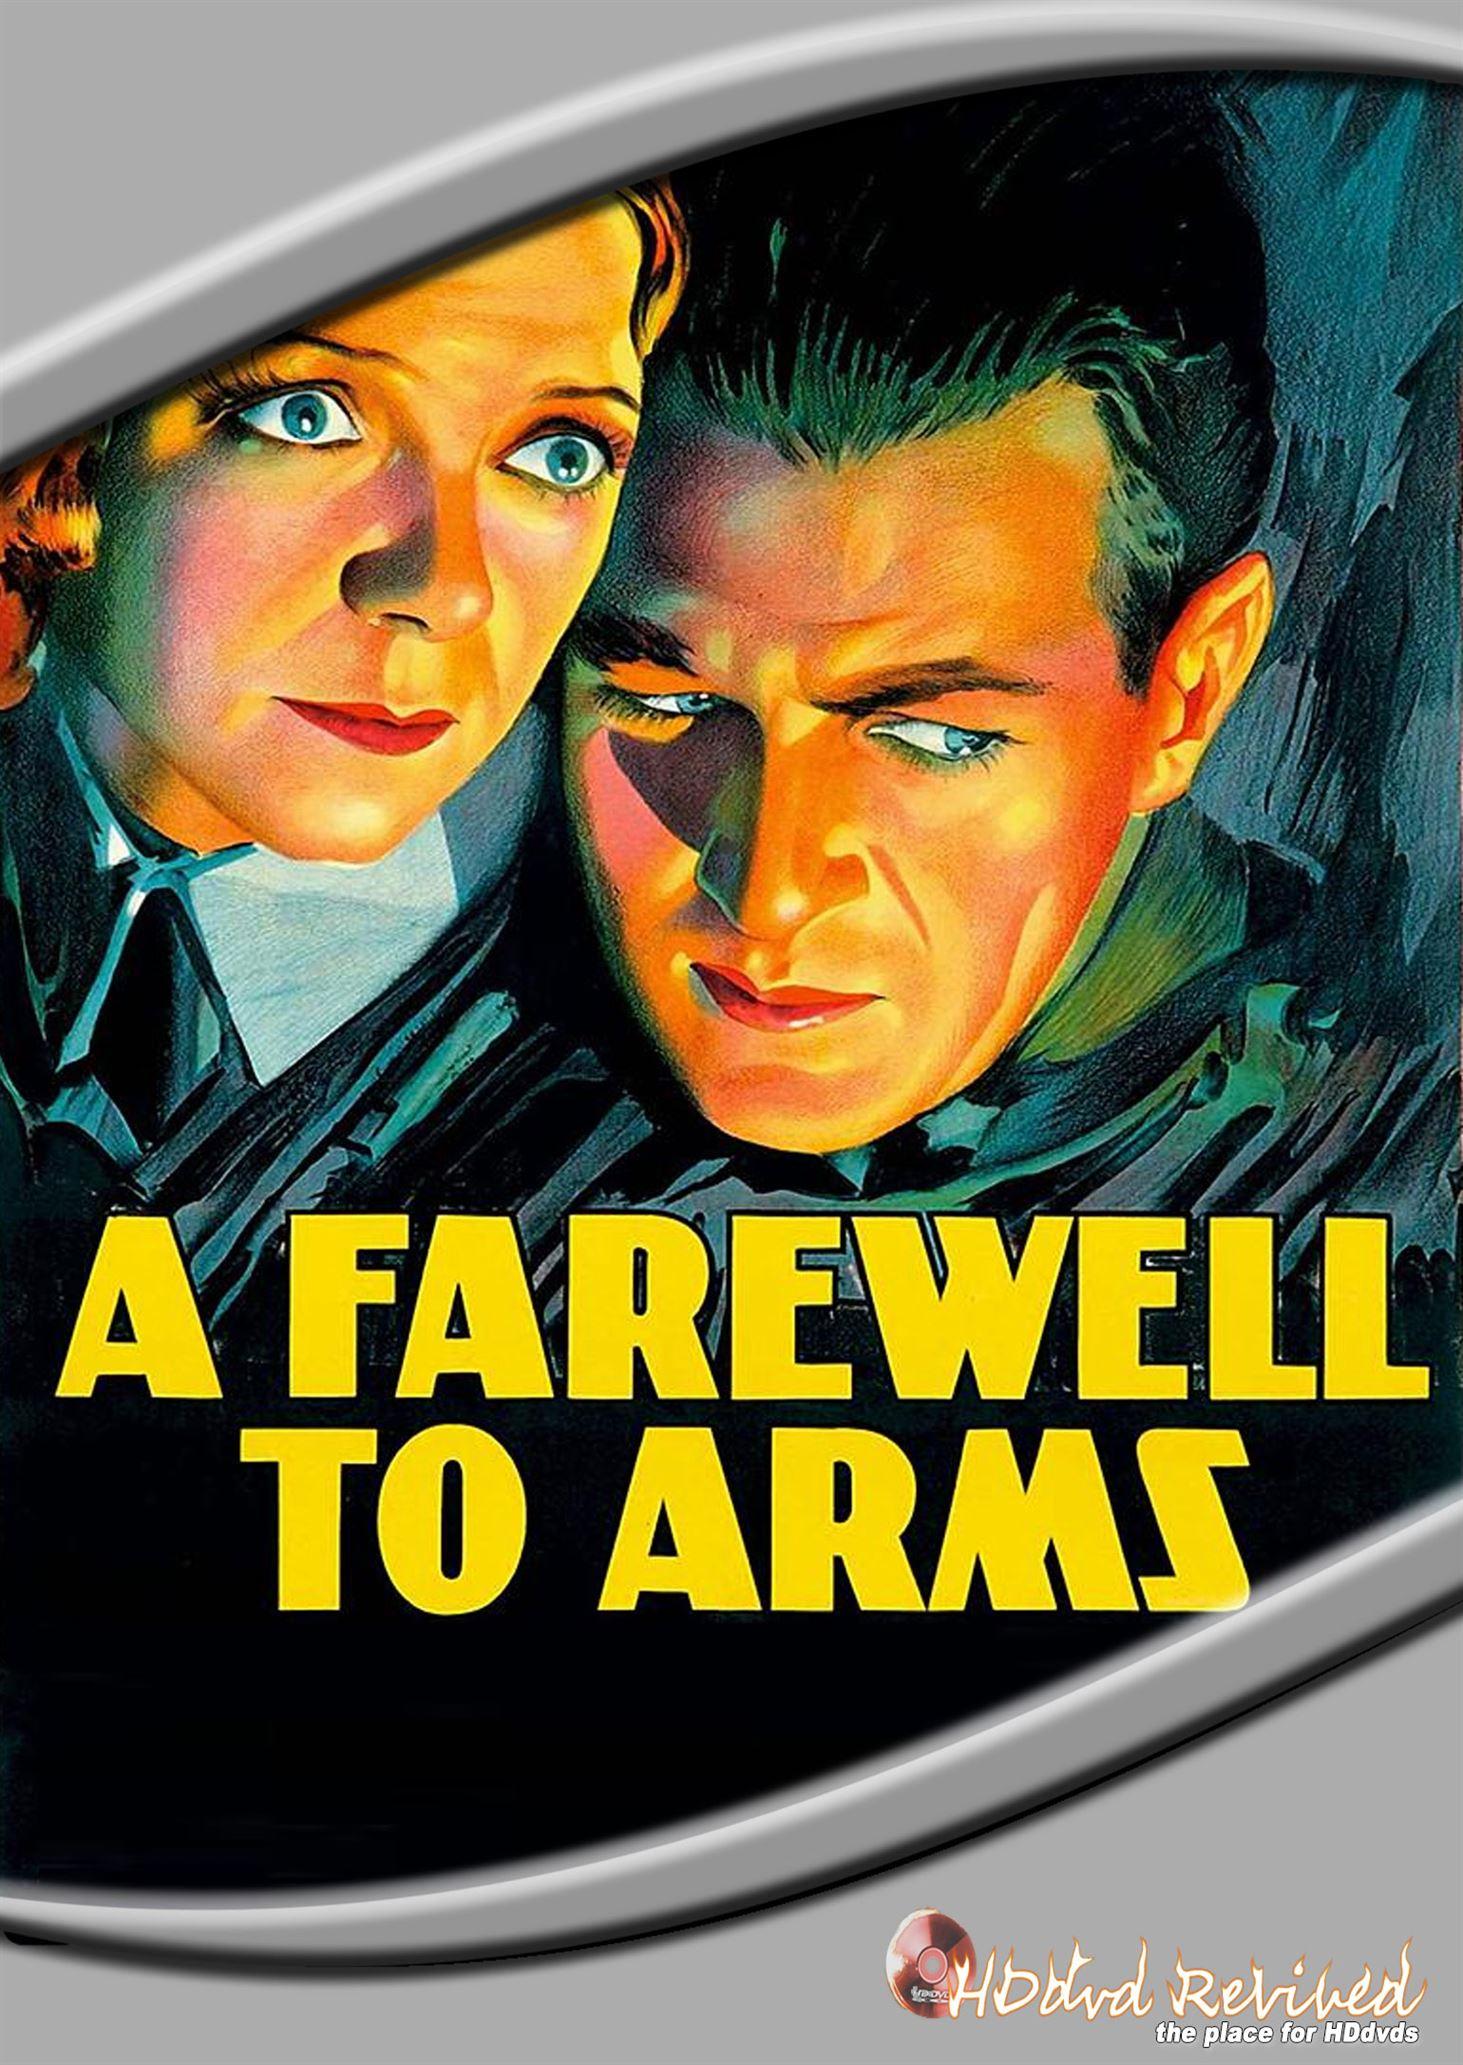 A Farewell to Arms (1932) Standard DVD (HDDVD-Revived) UK Seller